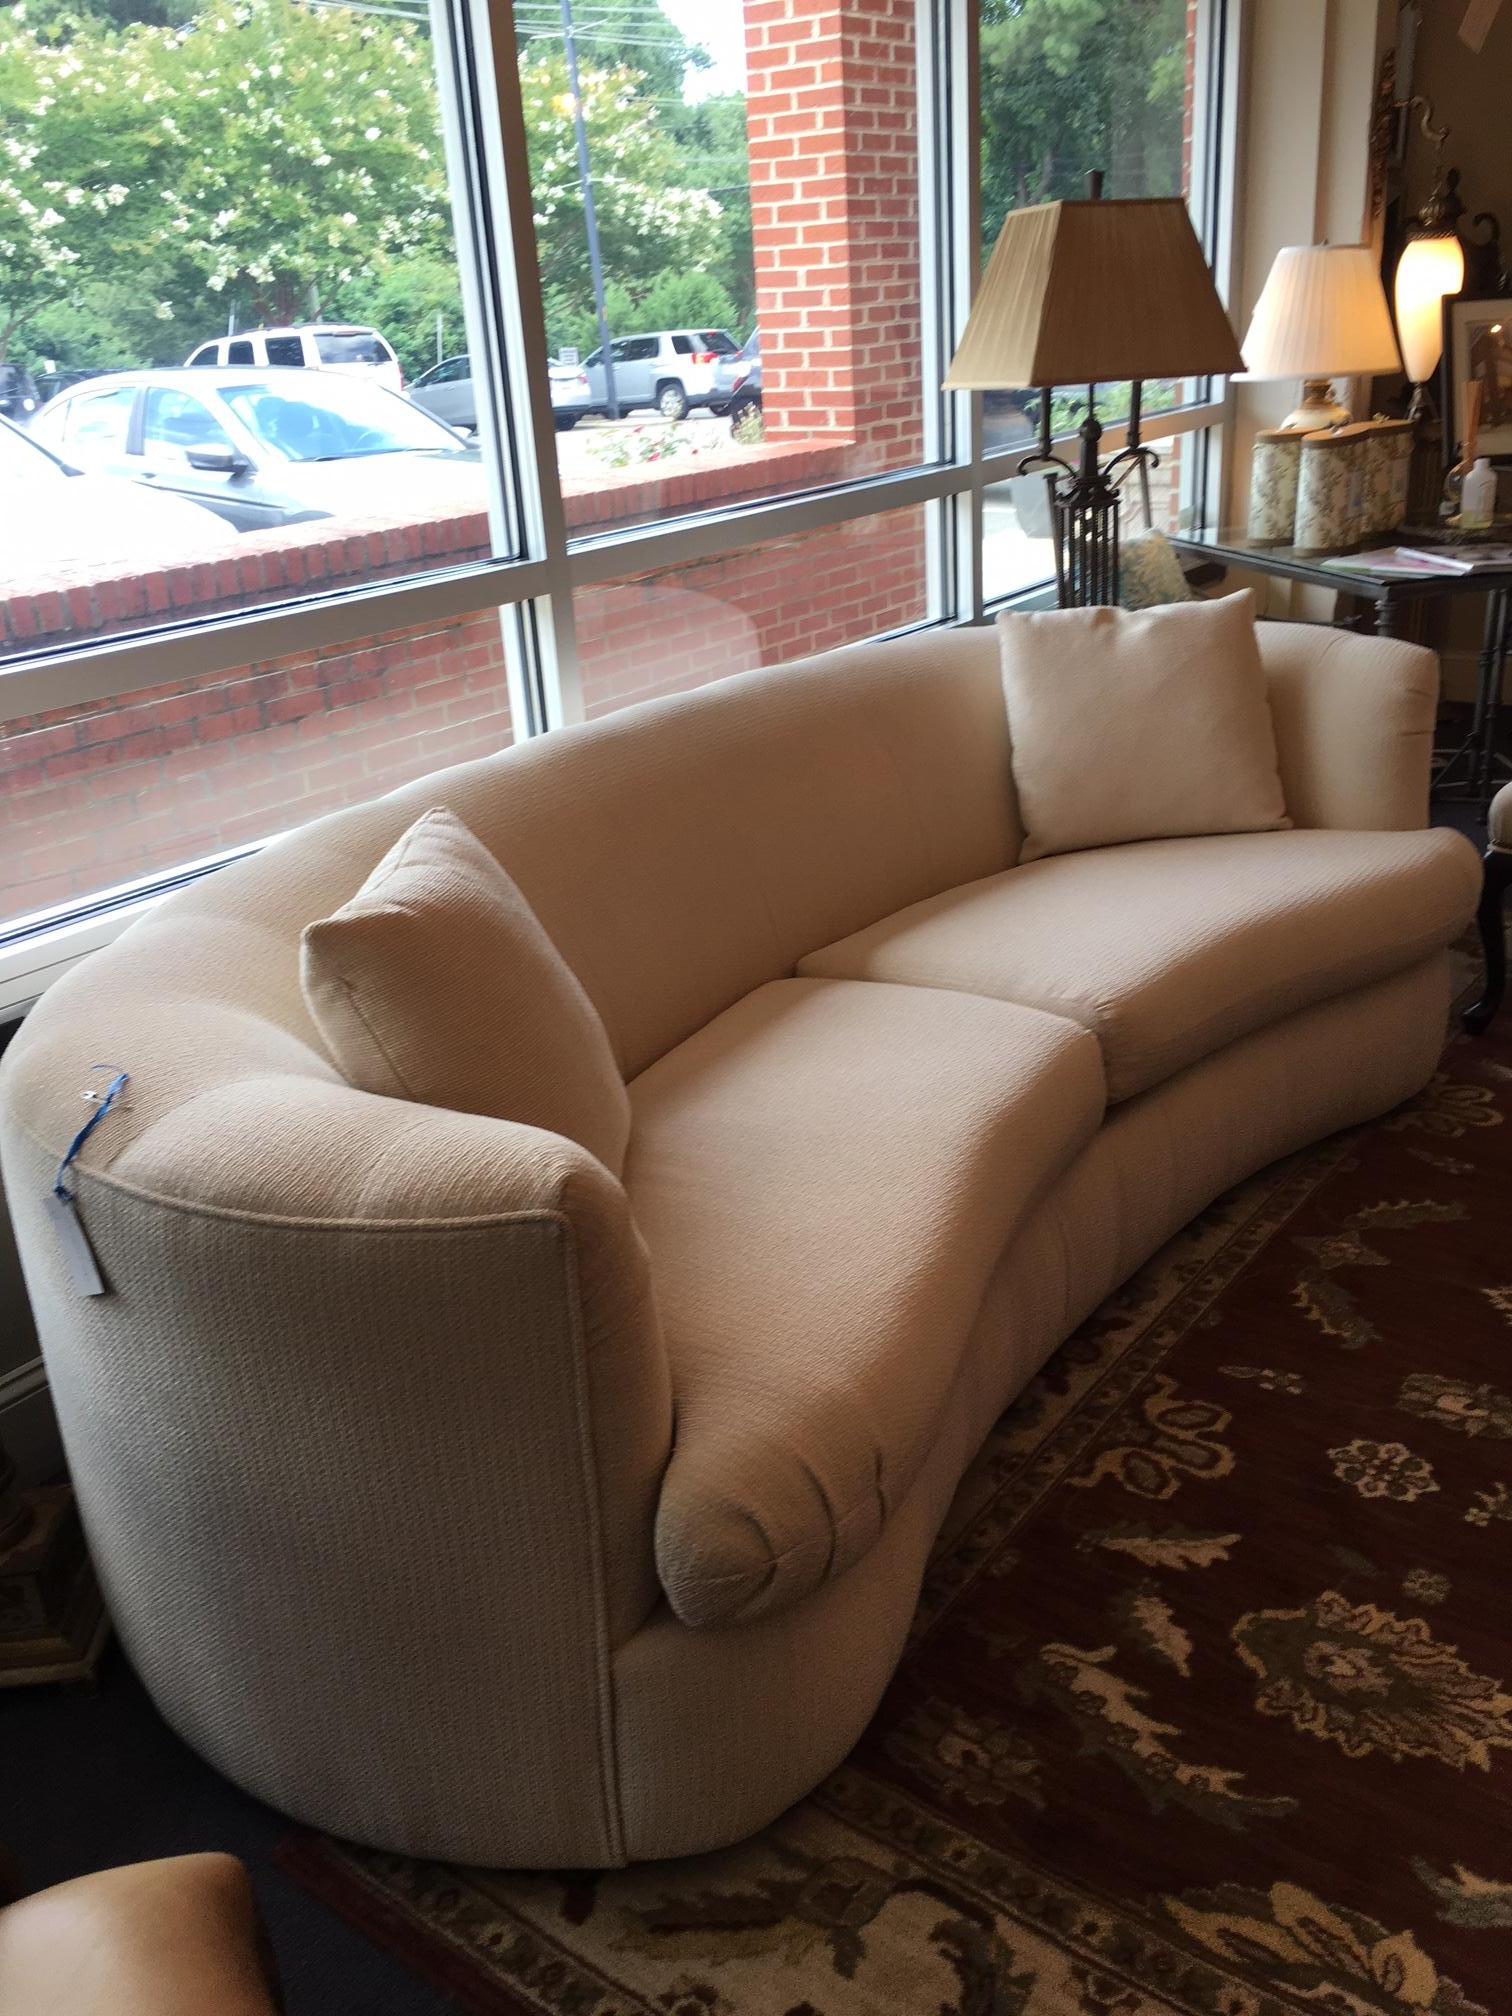 This beautiful sofa is in excellent condition. Featuring curved arms and back, the flow continues with a gentle curve to the front of the sofa. The fabric is a luxurious silk blend weave in a cream shade. it is flawless.